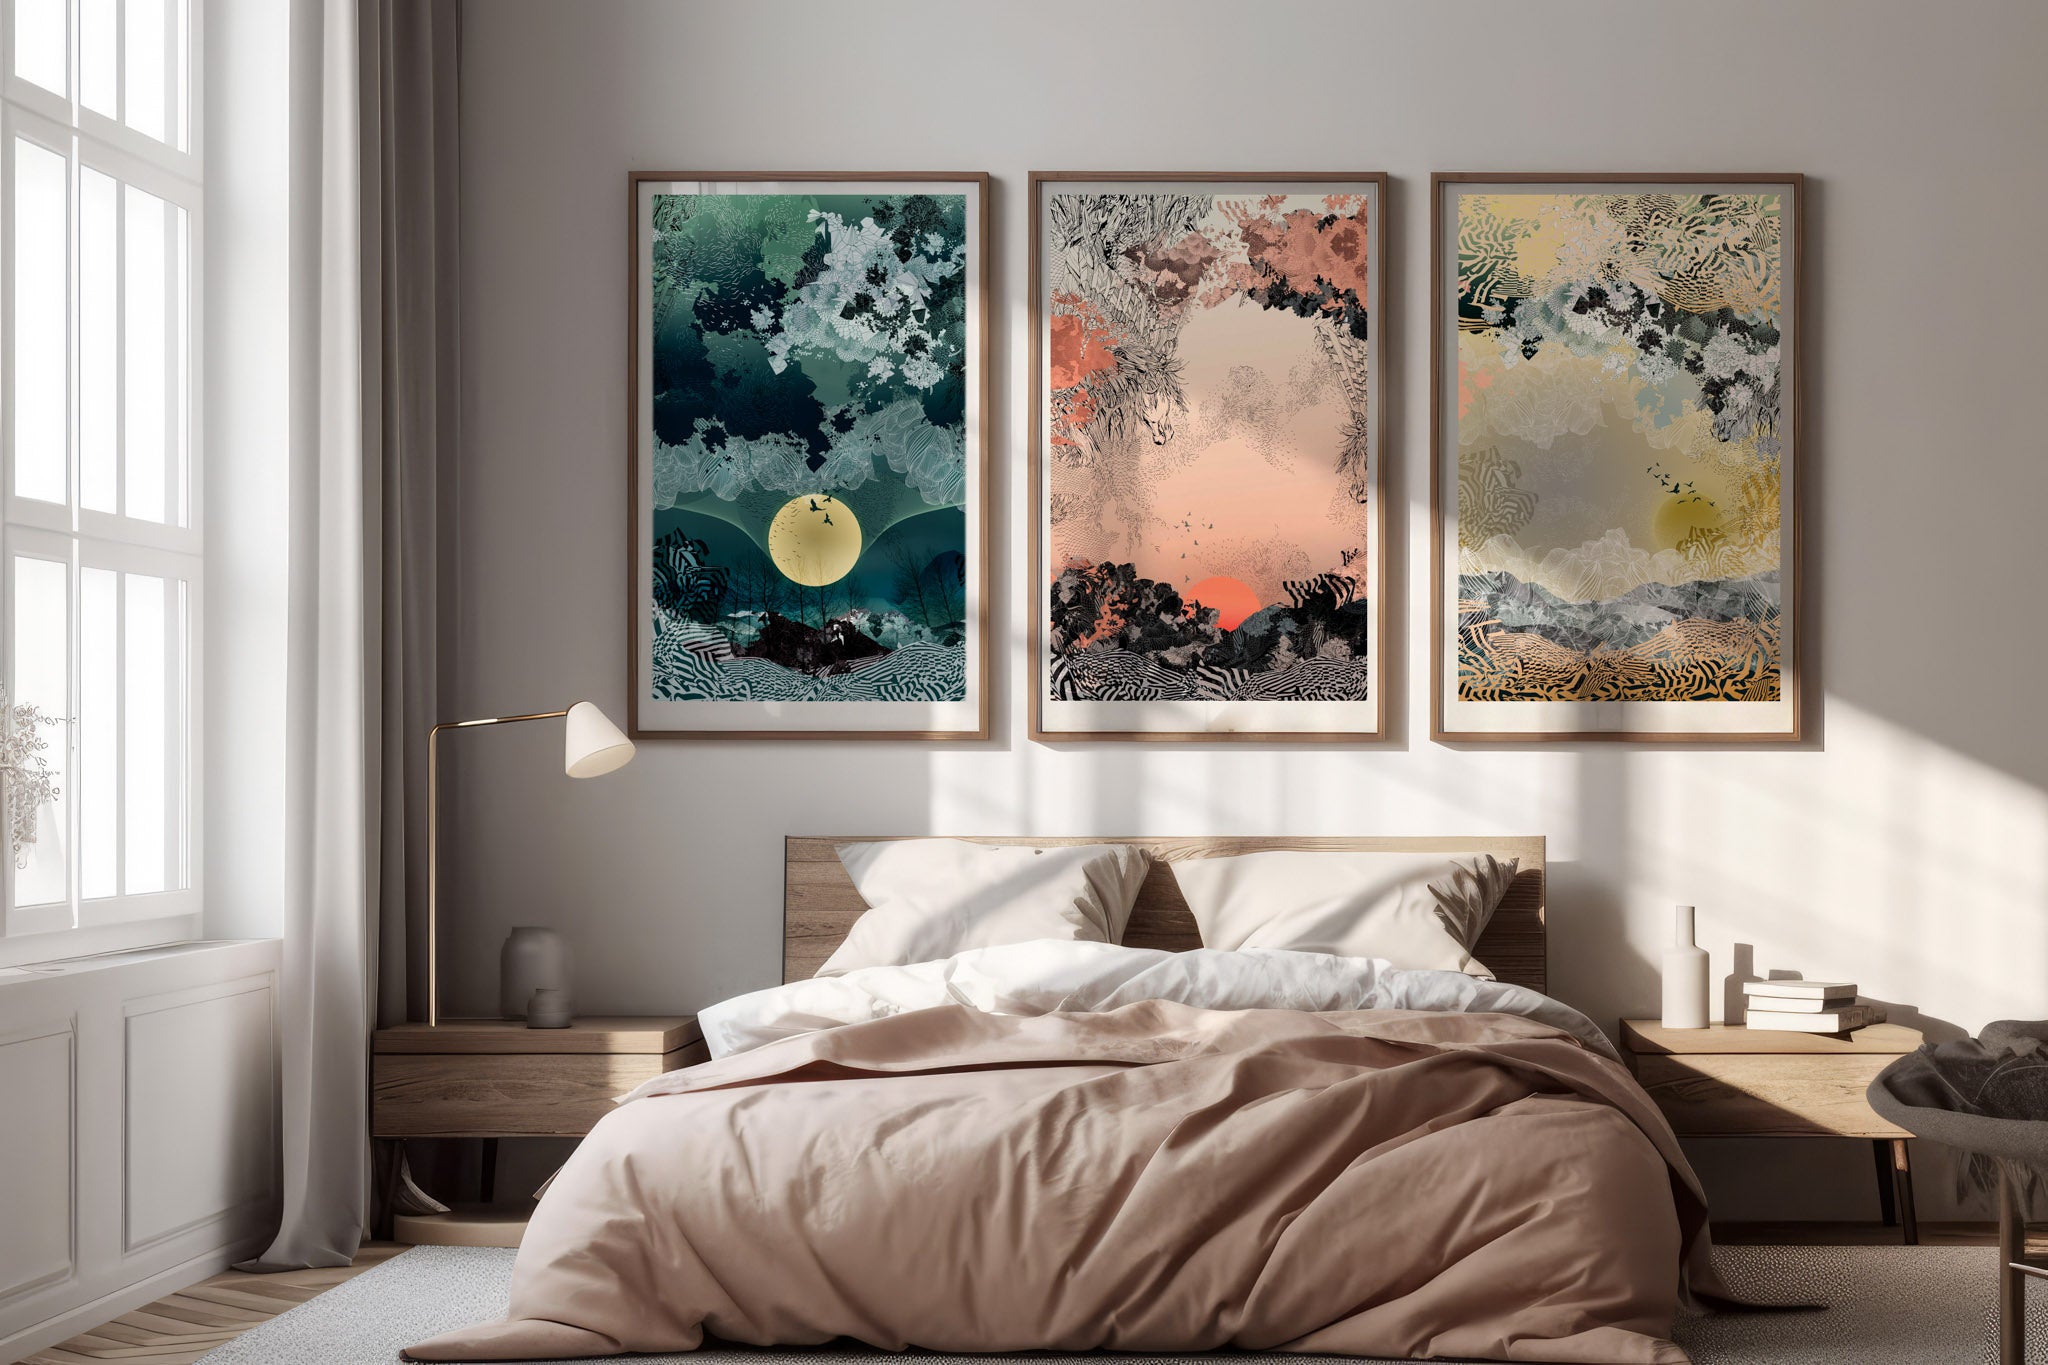 A mockup of New Moon giclee print in a white frame on a bedroom wall